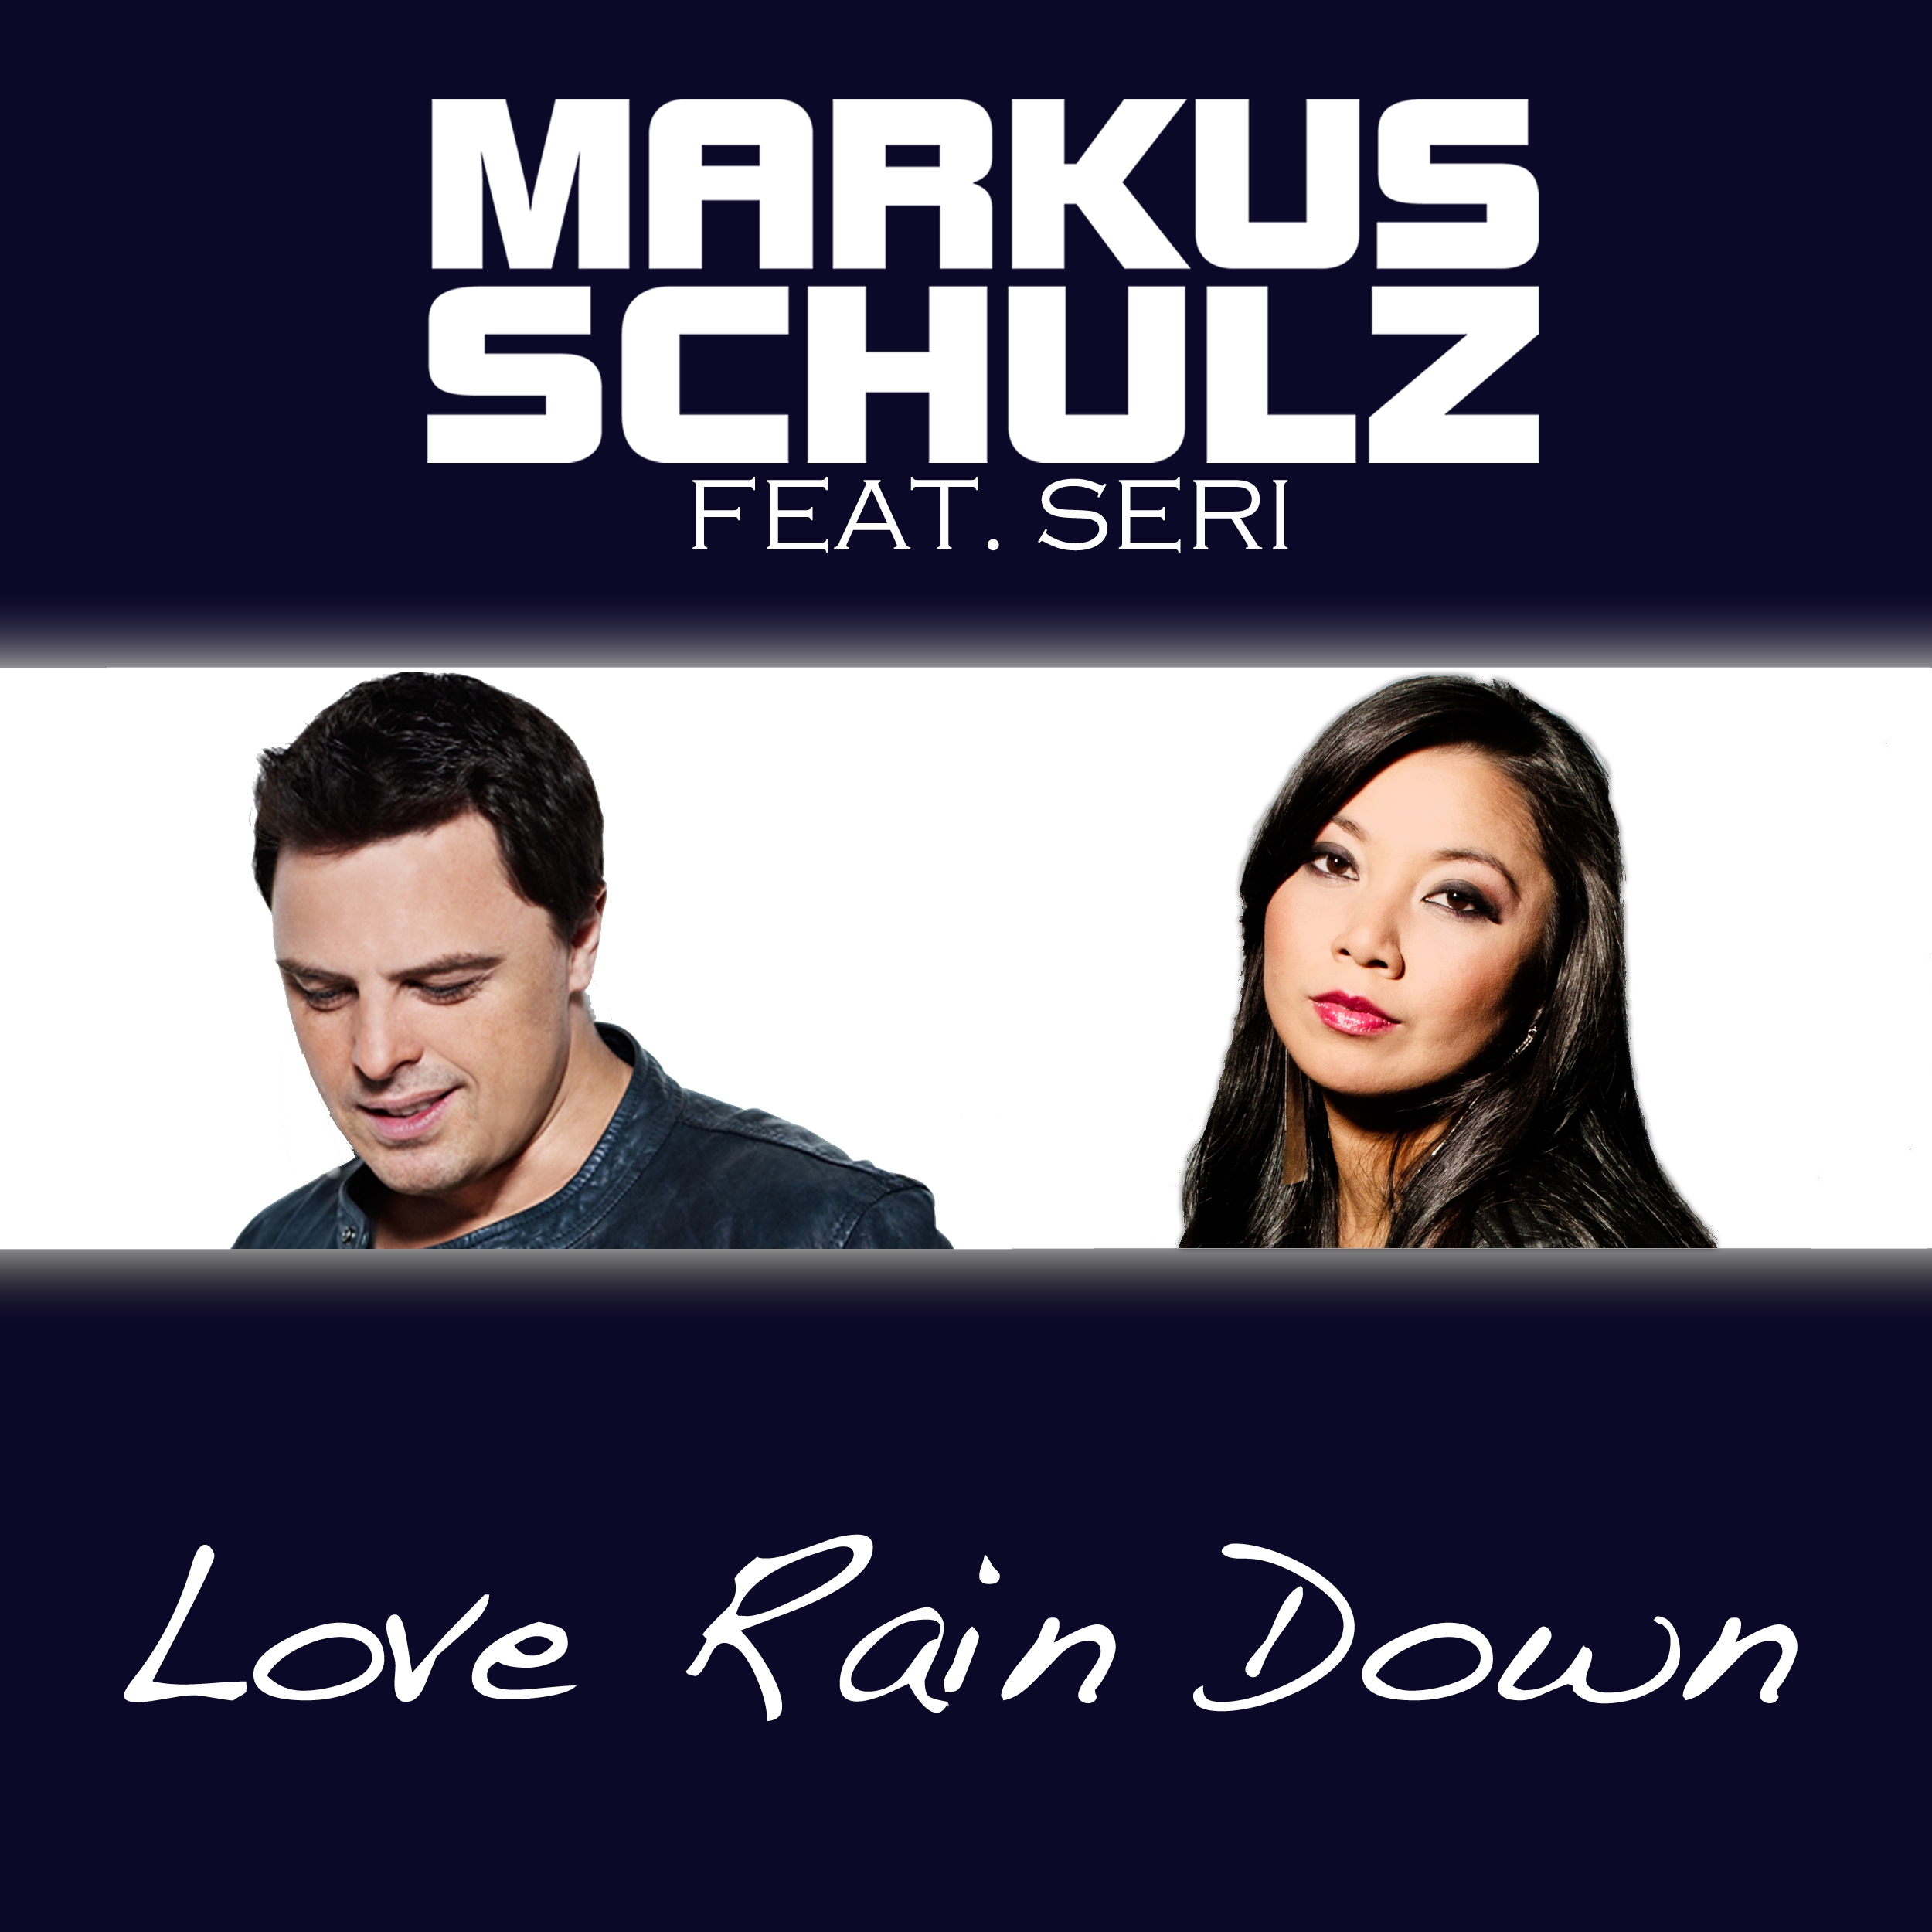 Love Rain Down (Extended Mix)